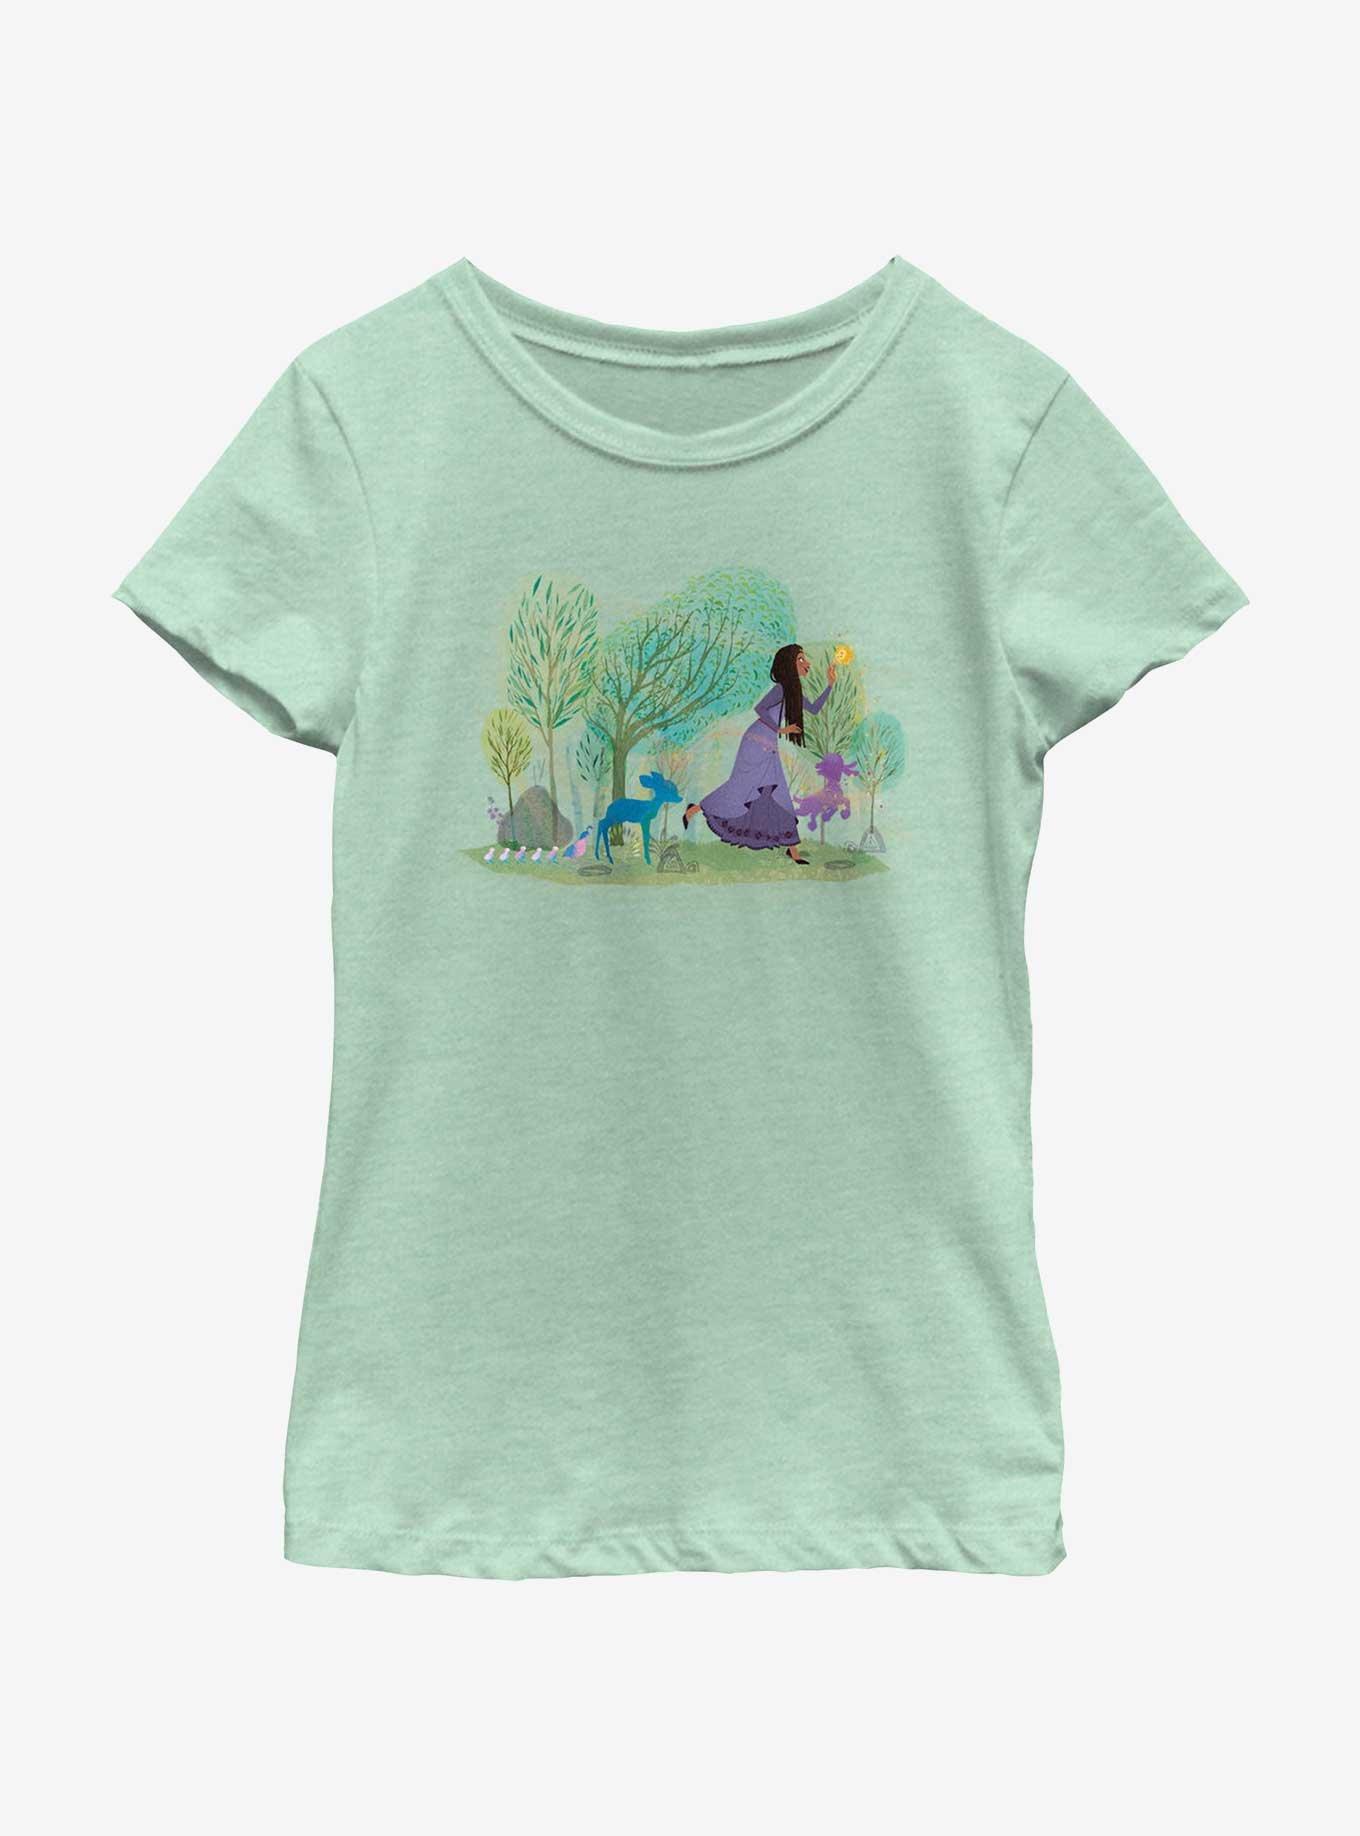 Disney Wish Play With Friends Asha Star and Valentino Youth Girls T-Shirt, MINT, hi-res